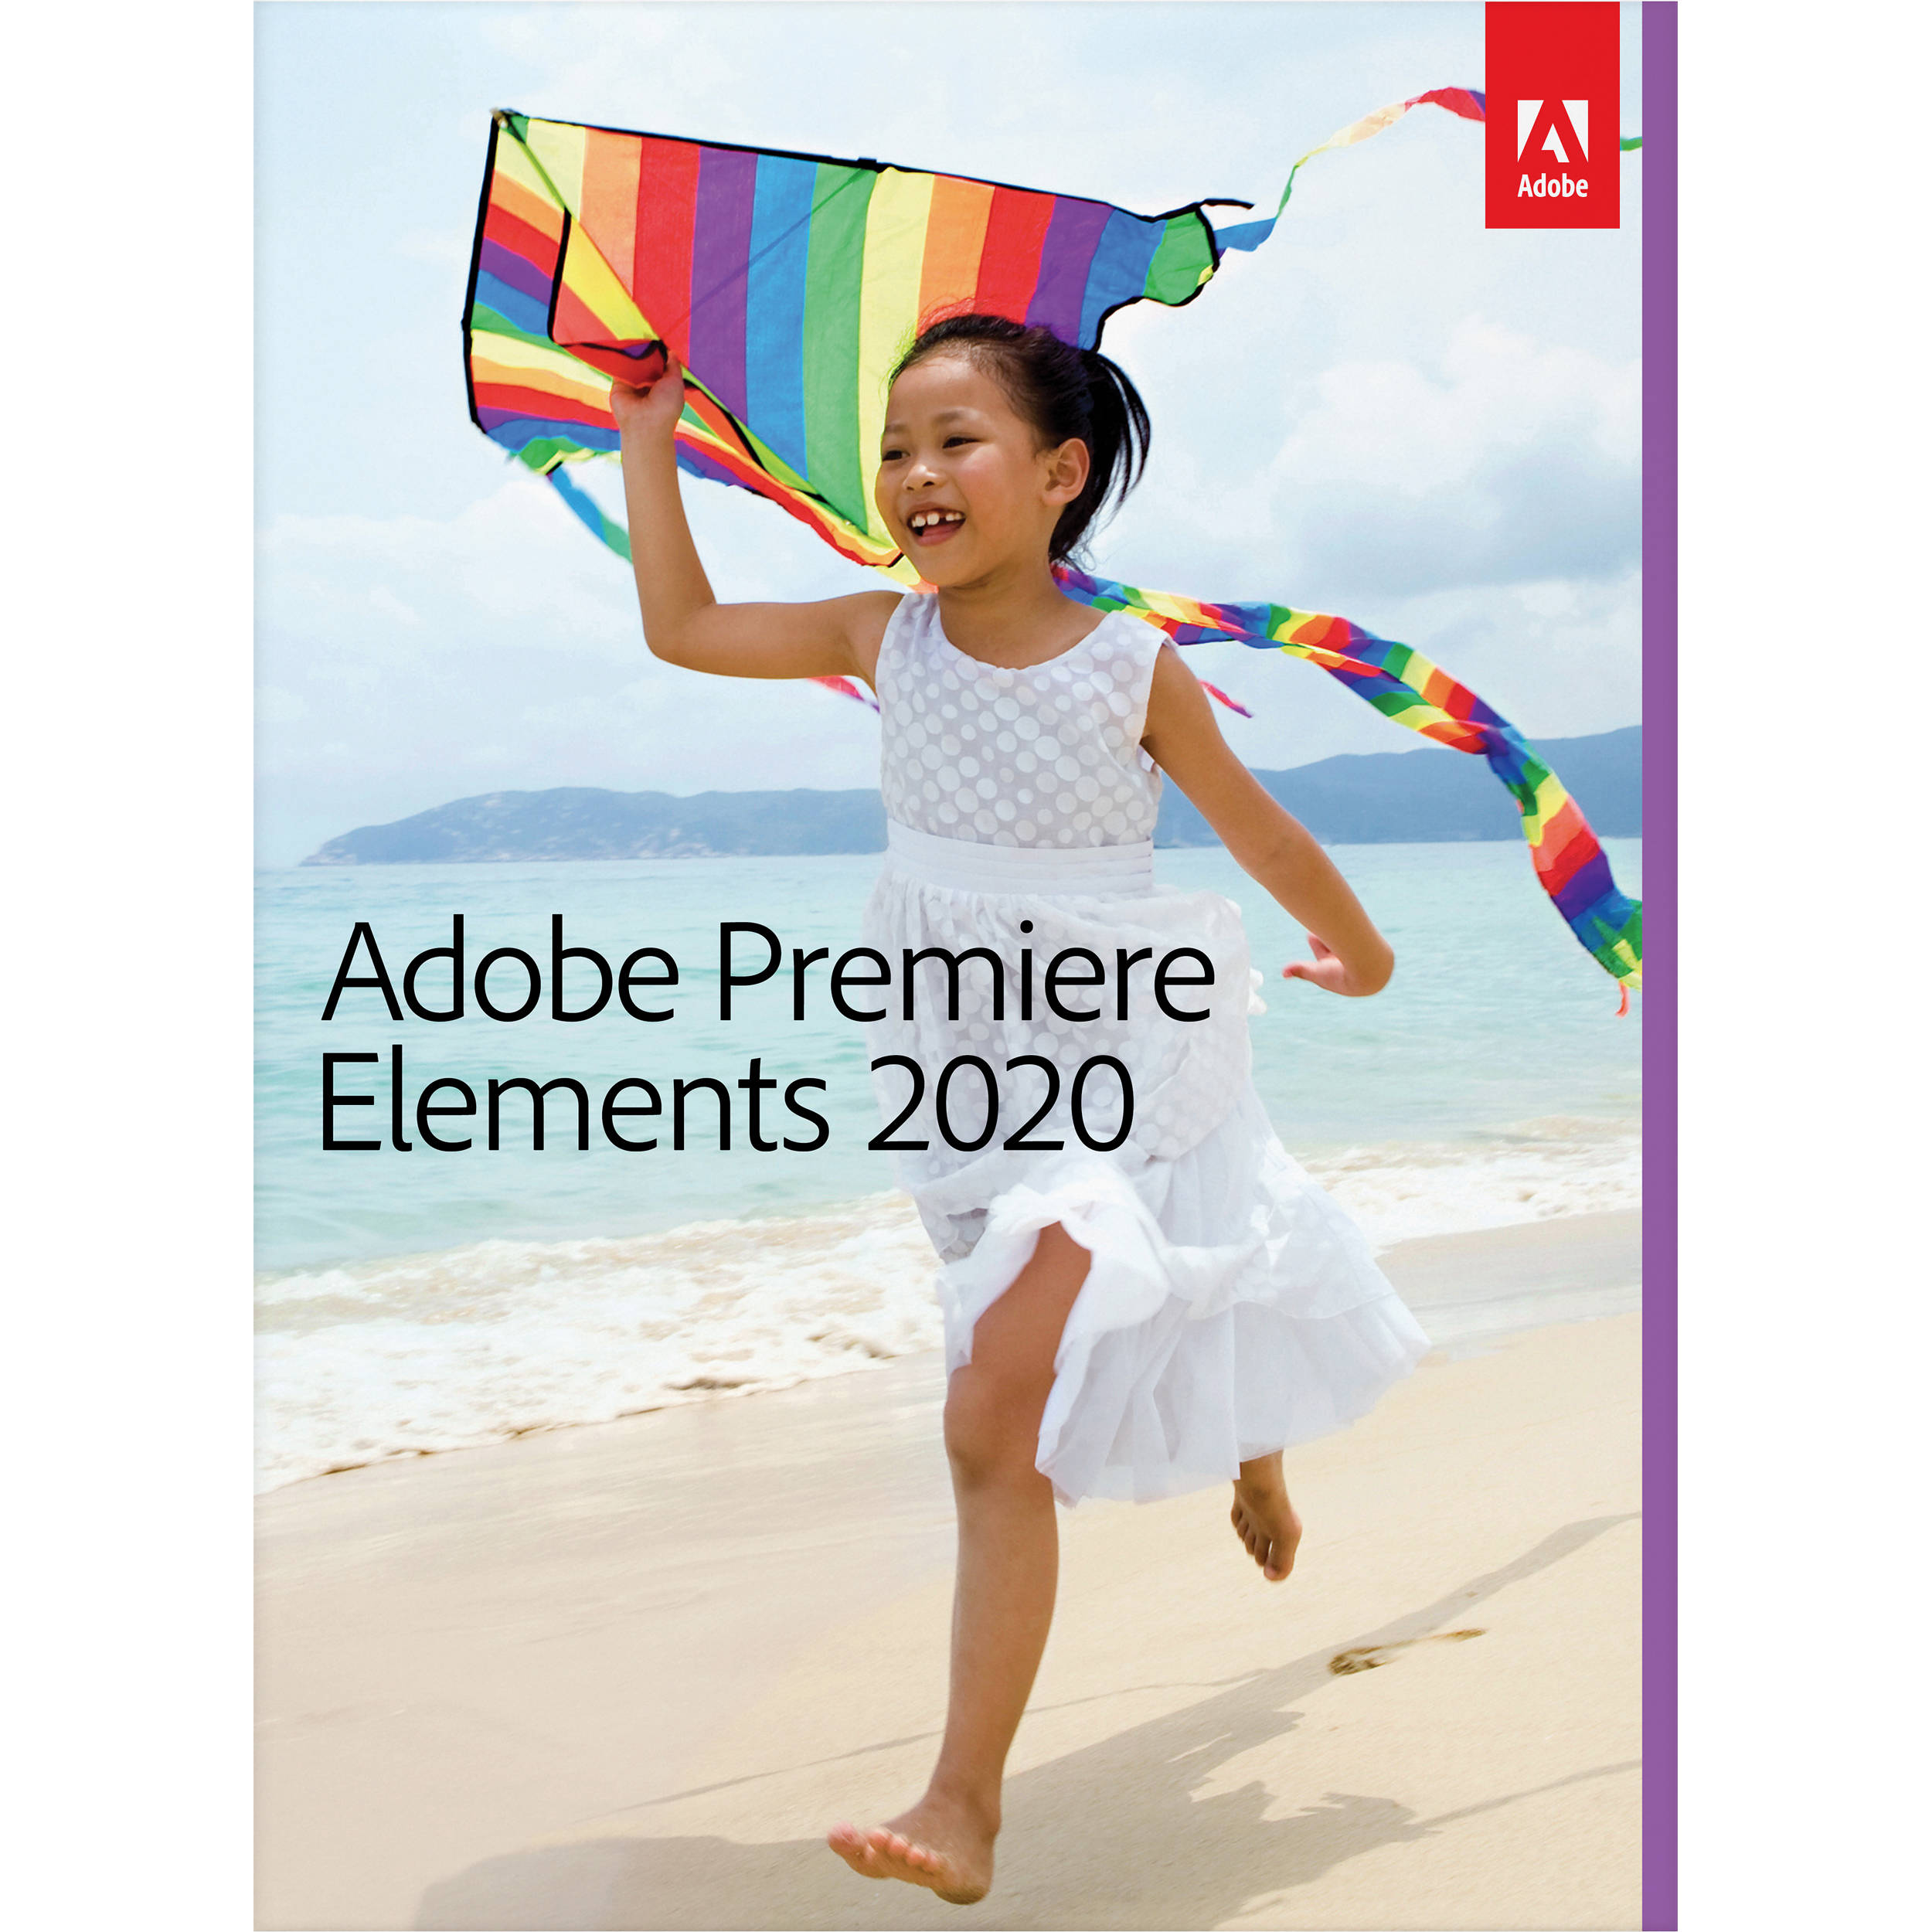 Adobe premiere elements 2020 video editing software